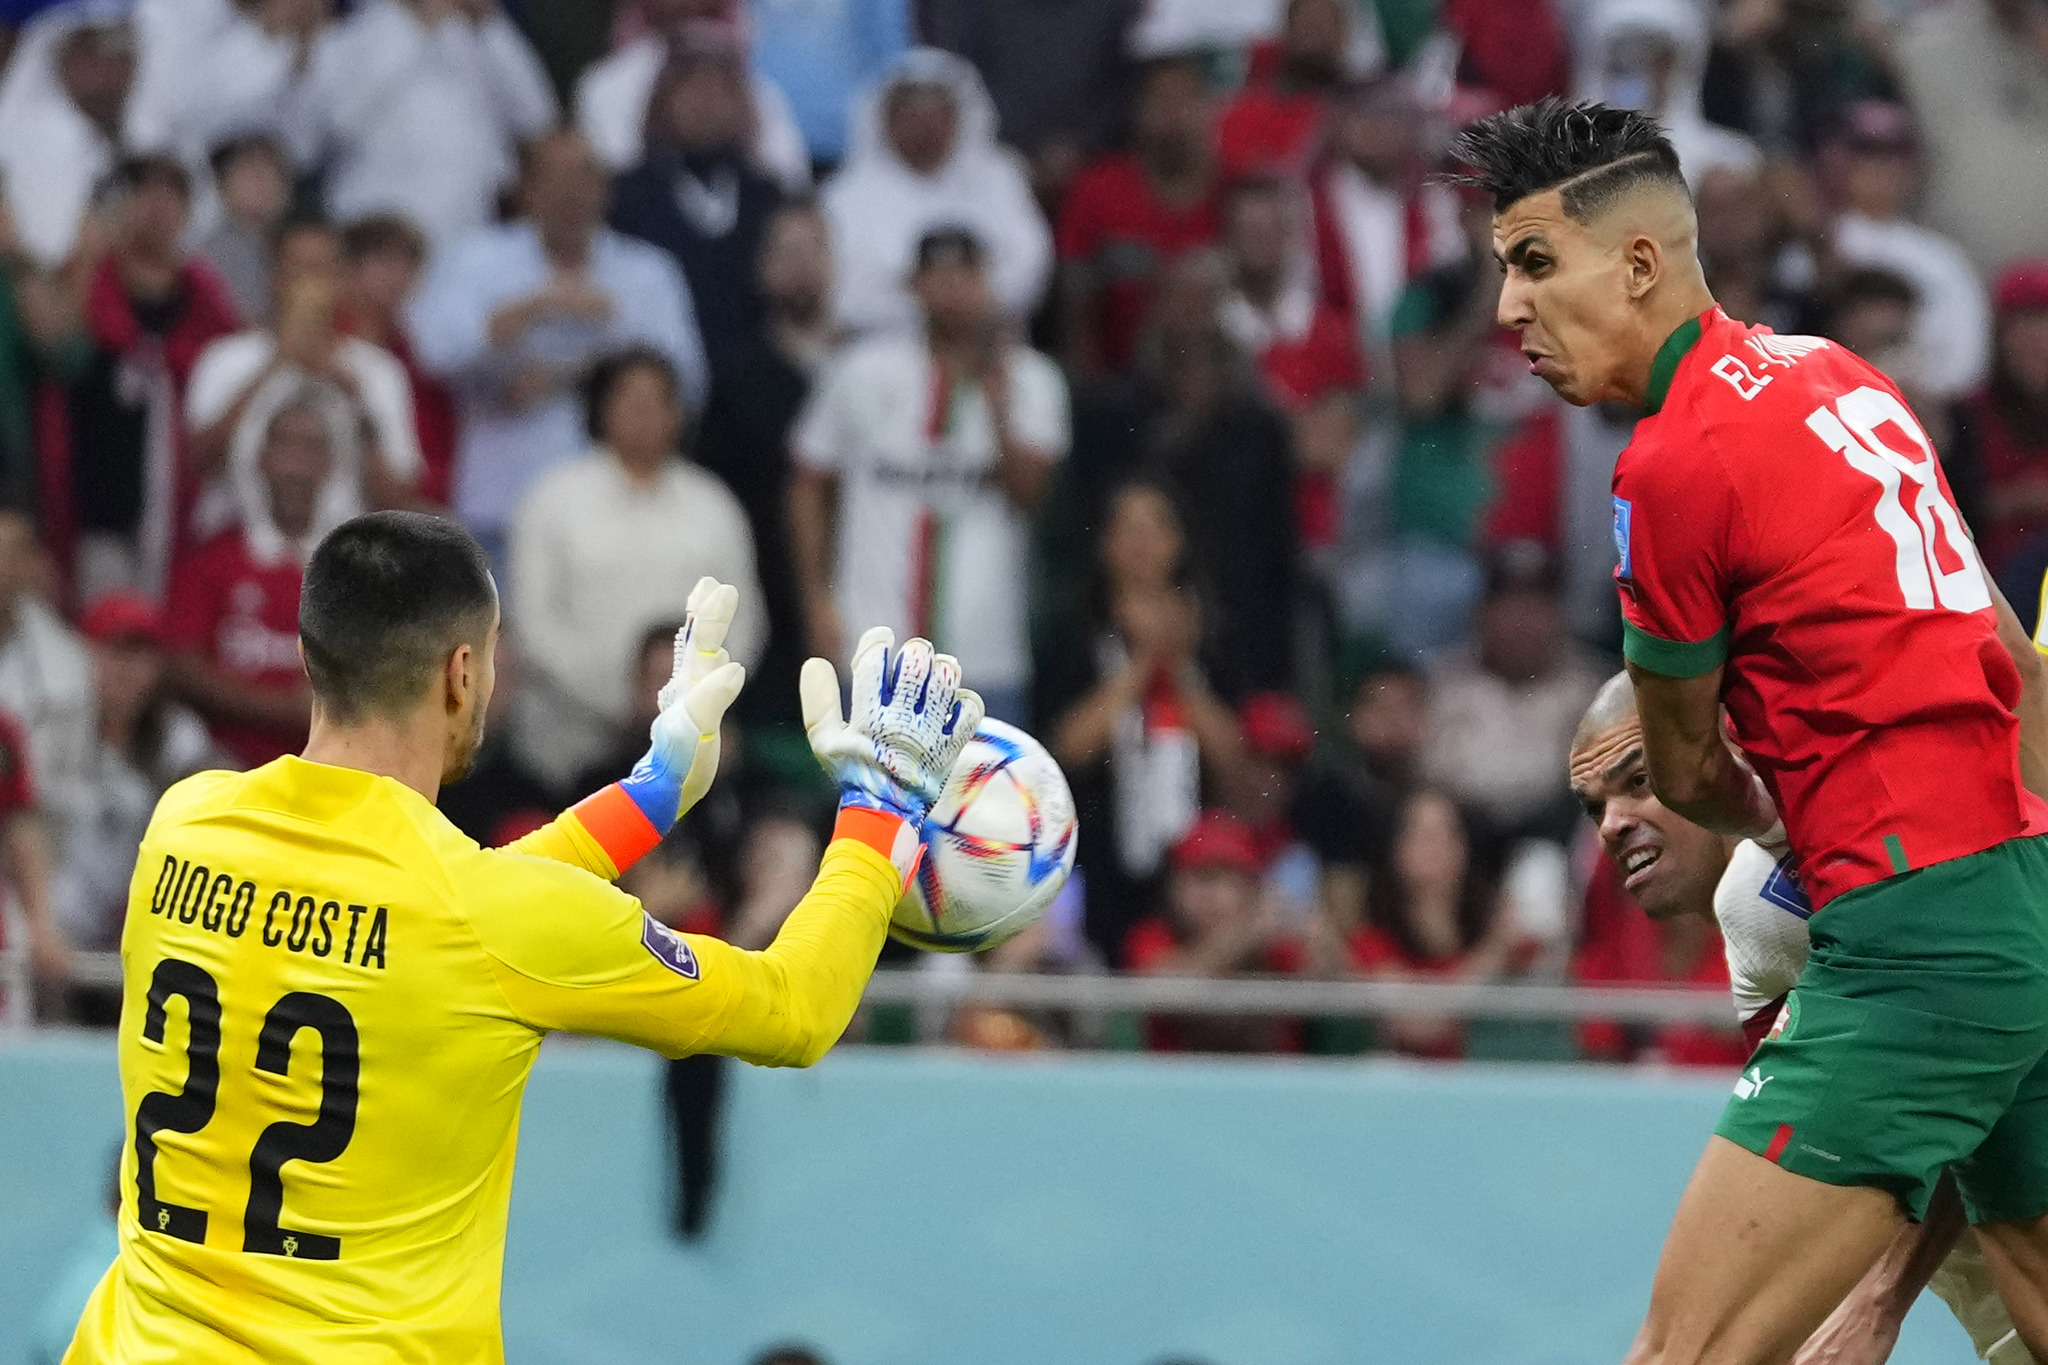 Morocco's Jawad El Yamiq, right, misses a scoring chance in front  lt;HIT gt;Portugal lt;/HIT gt;'s goalkeeper Diogo Costa during the World Cup quarterfinal soccer match between Morocco and  lt;HIT gt;Portugal lt;/HIT gt;, at Al Thumama Stadium in Doha, Qatar, Saturday, Dec. 10, 2022. (AP Photo/Petr David Josek)